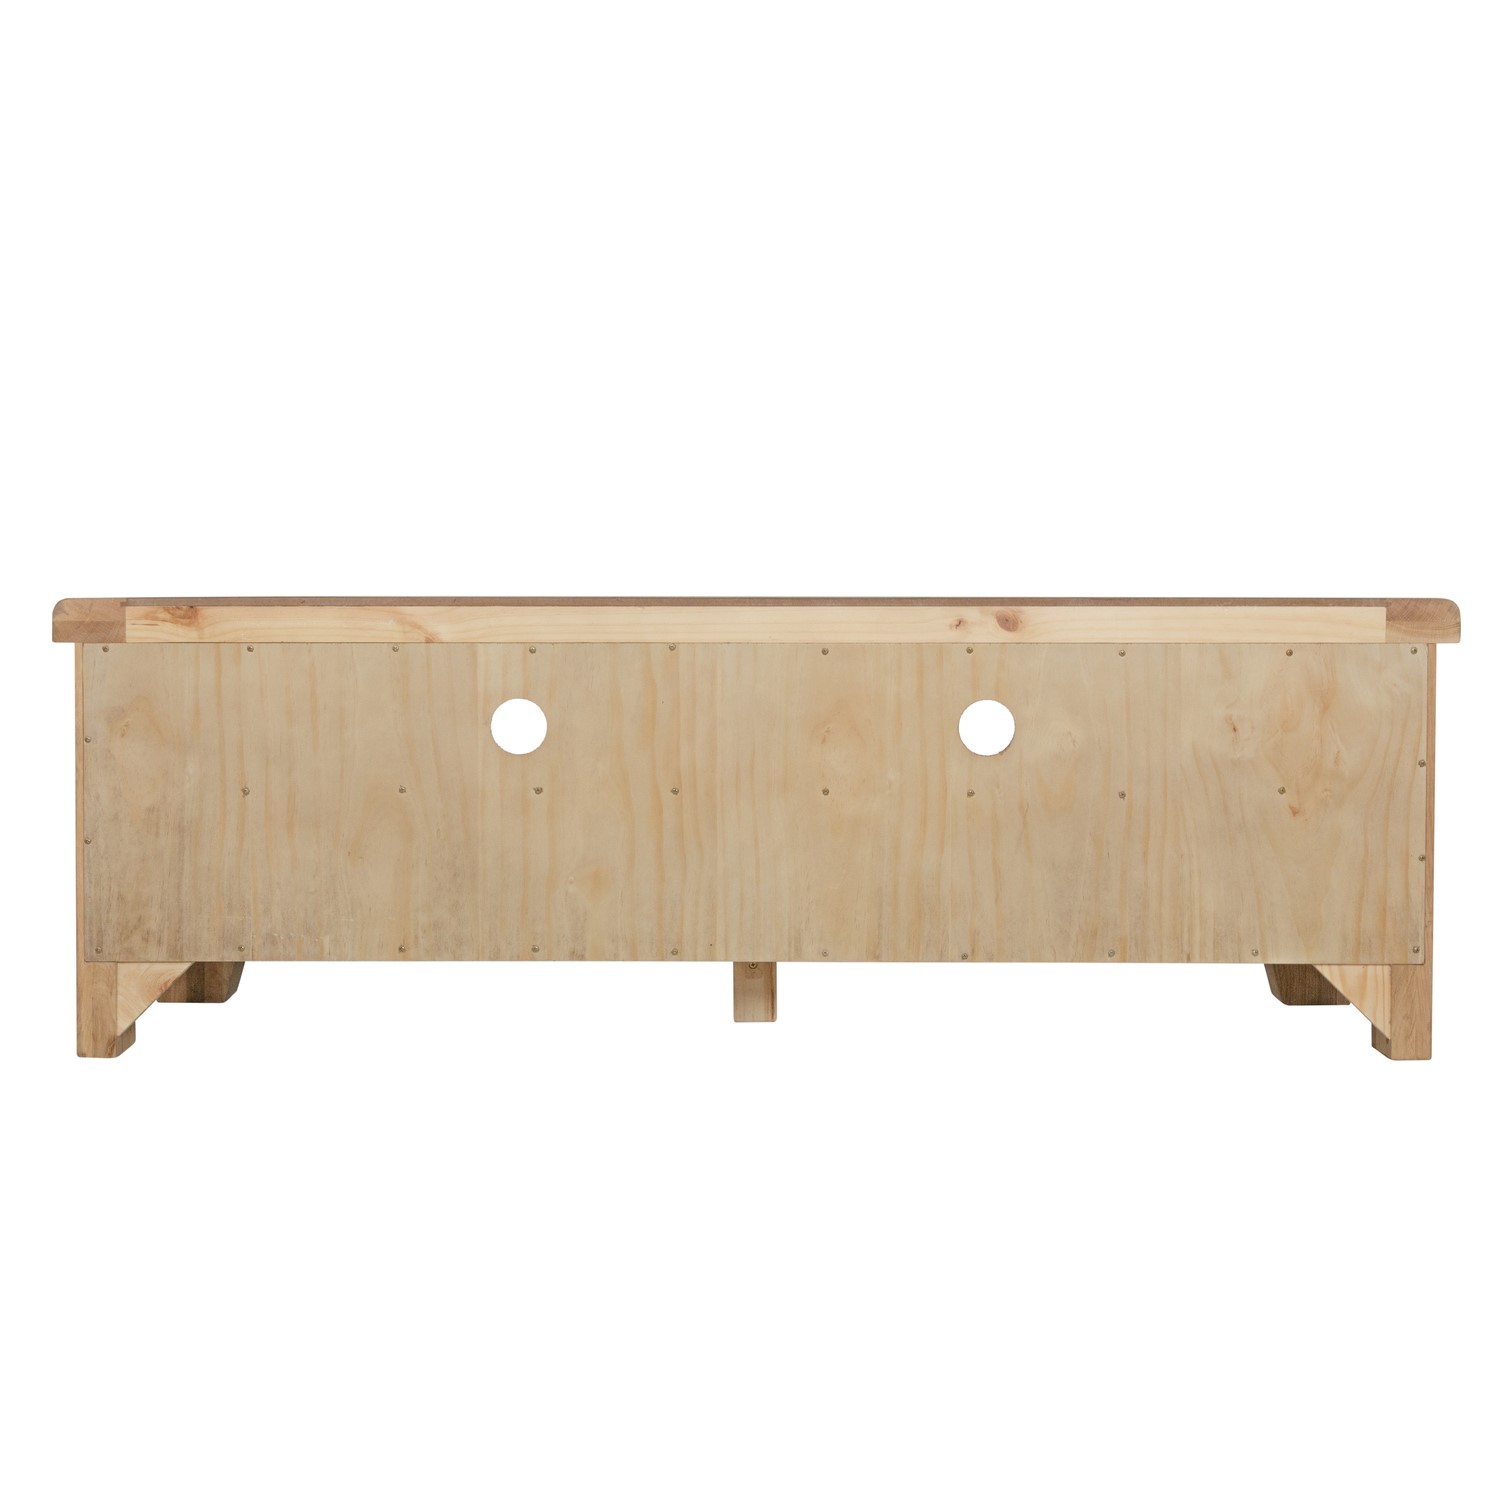 Read more about Large smoked oak tv stand with storage